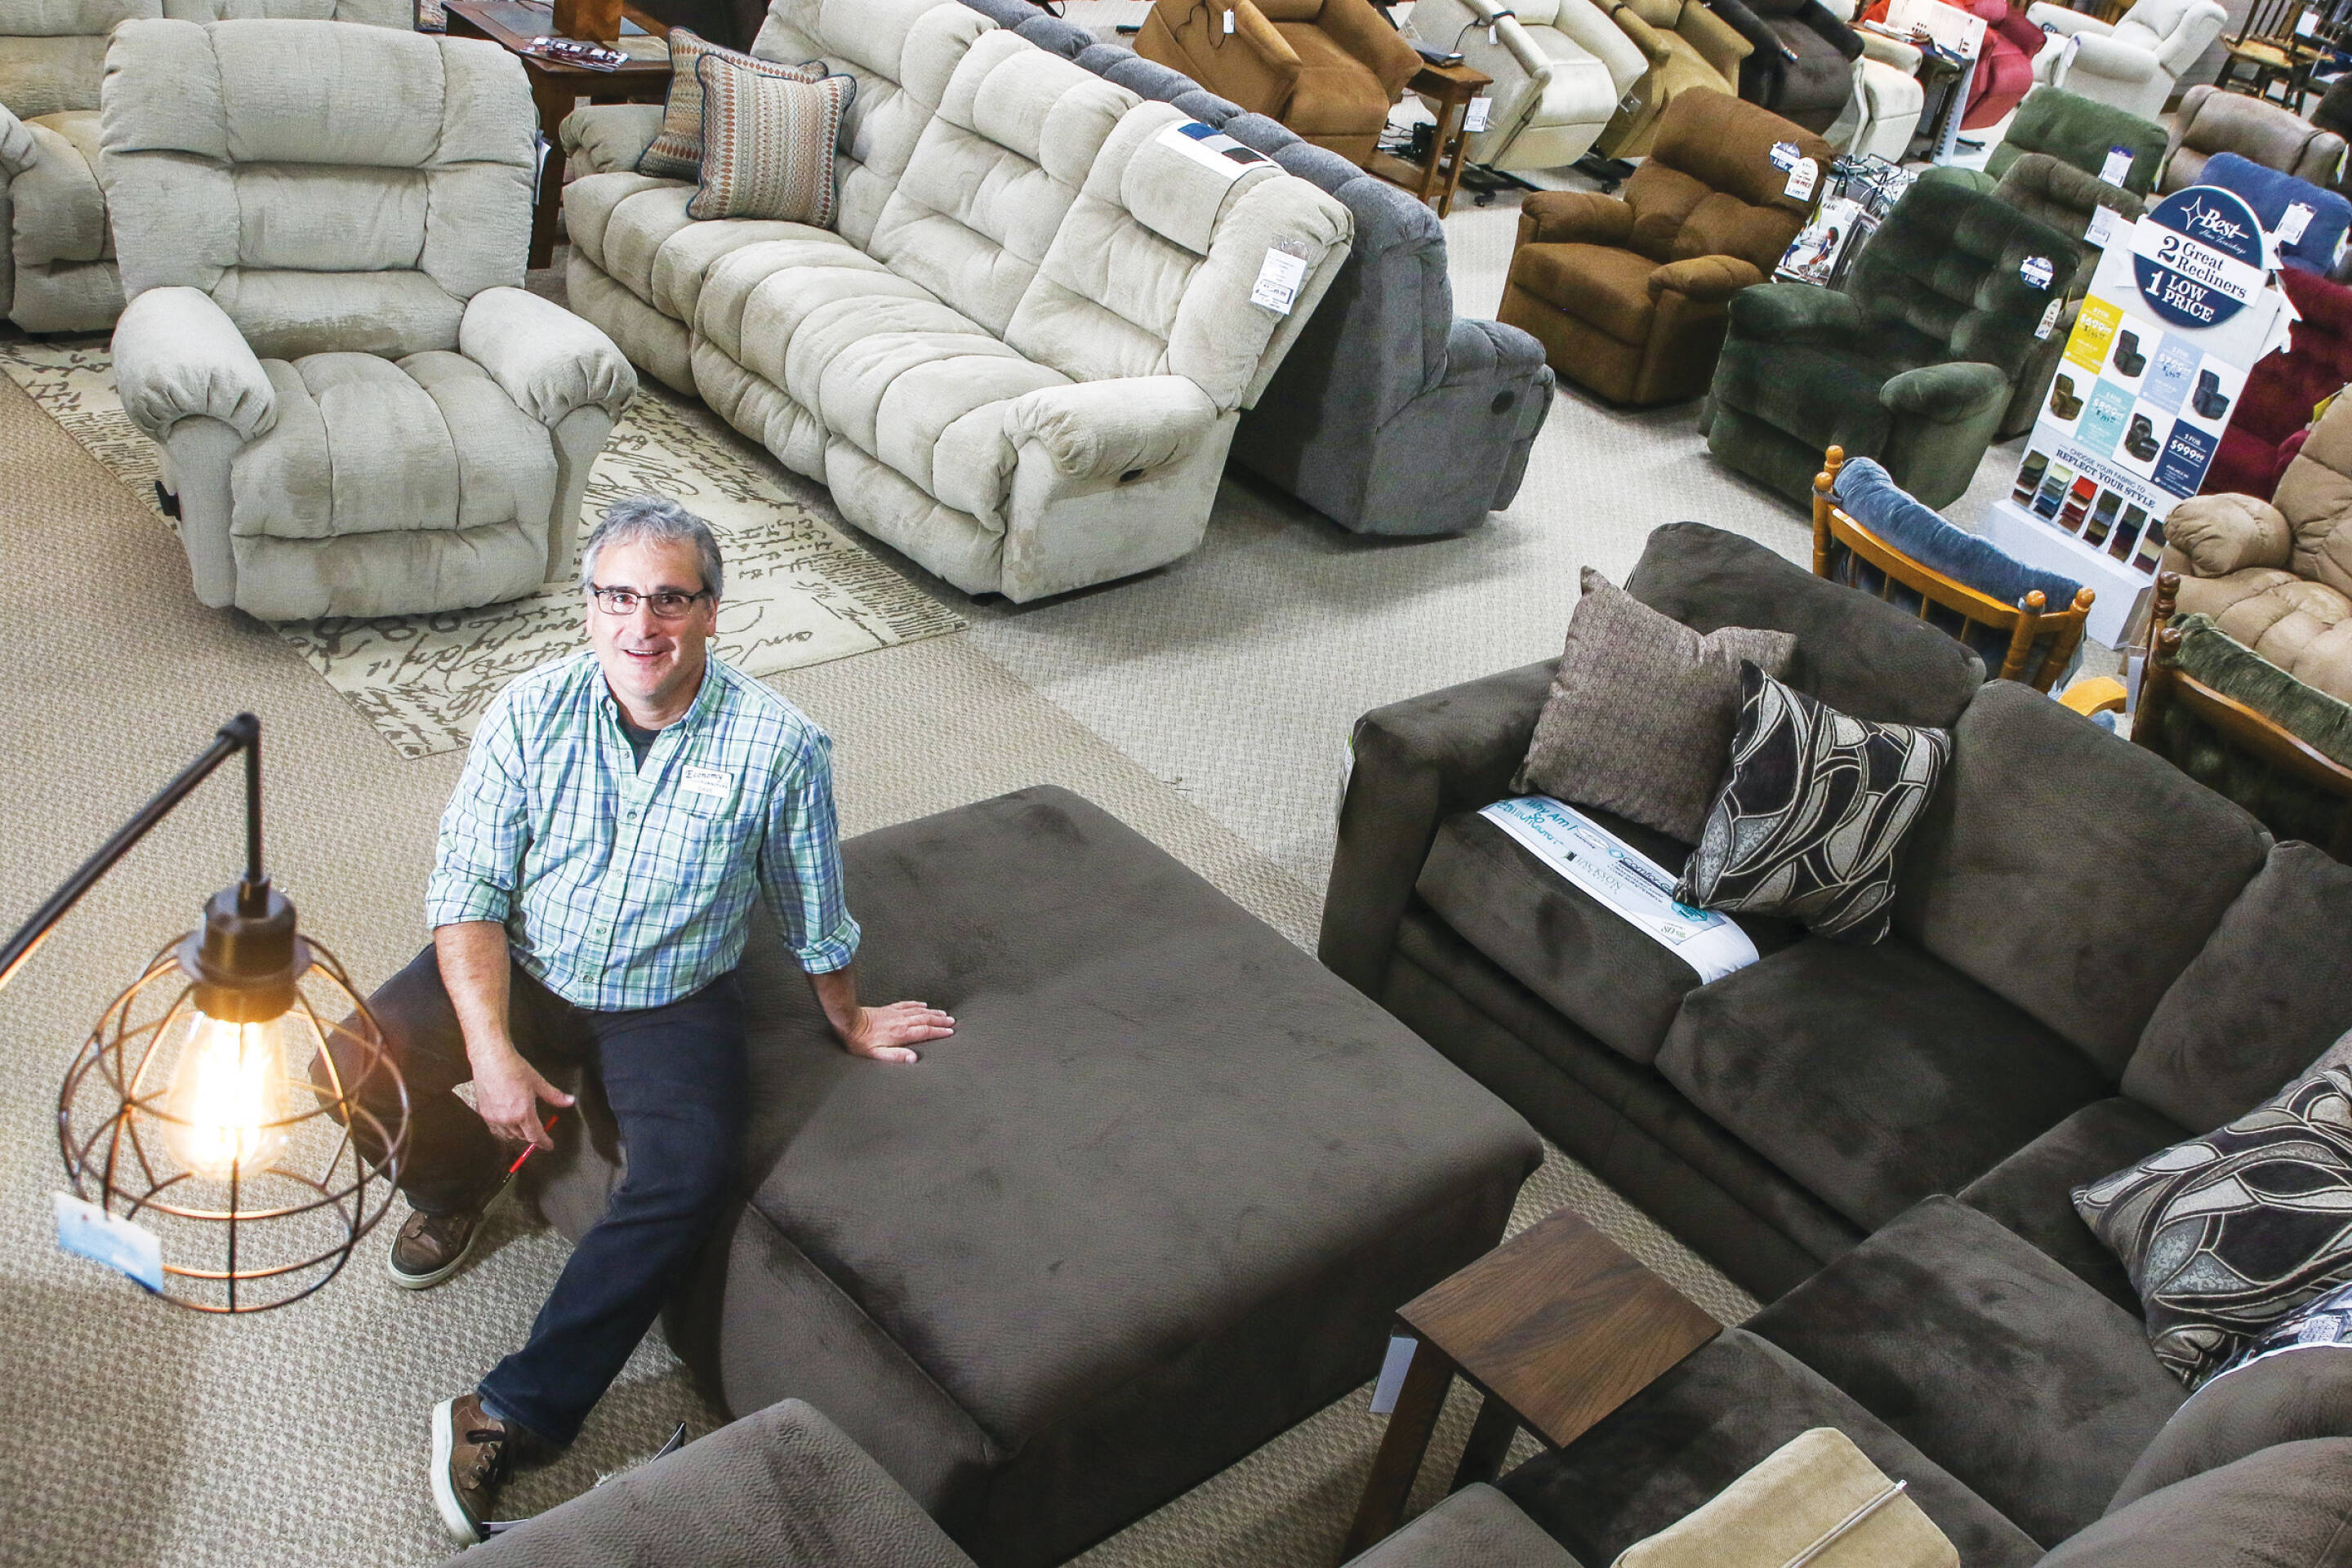 Shop Talk Economy Furniture Opens New Location In Its 75th